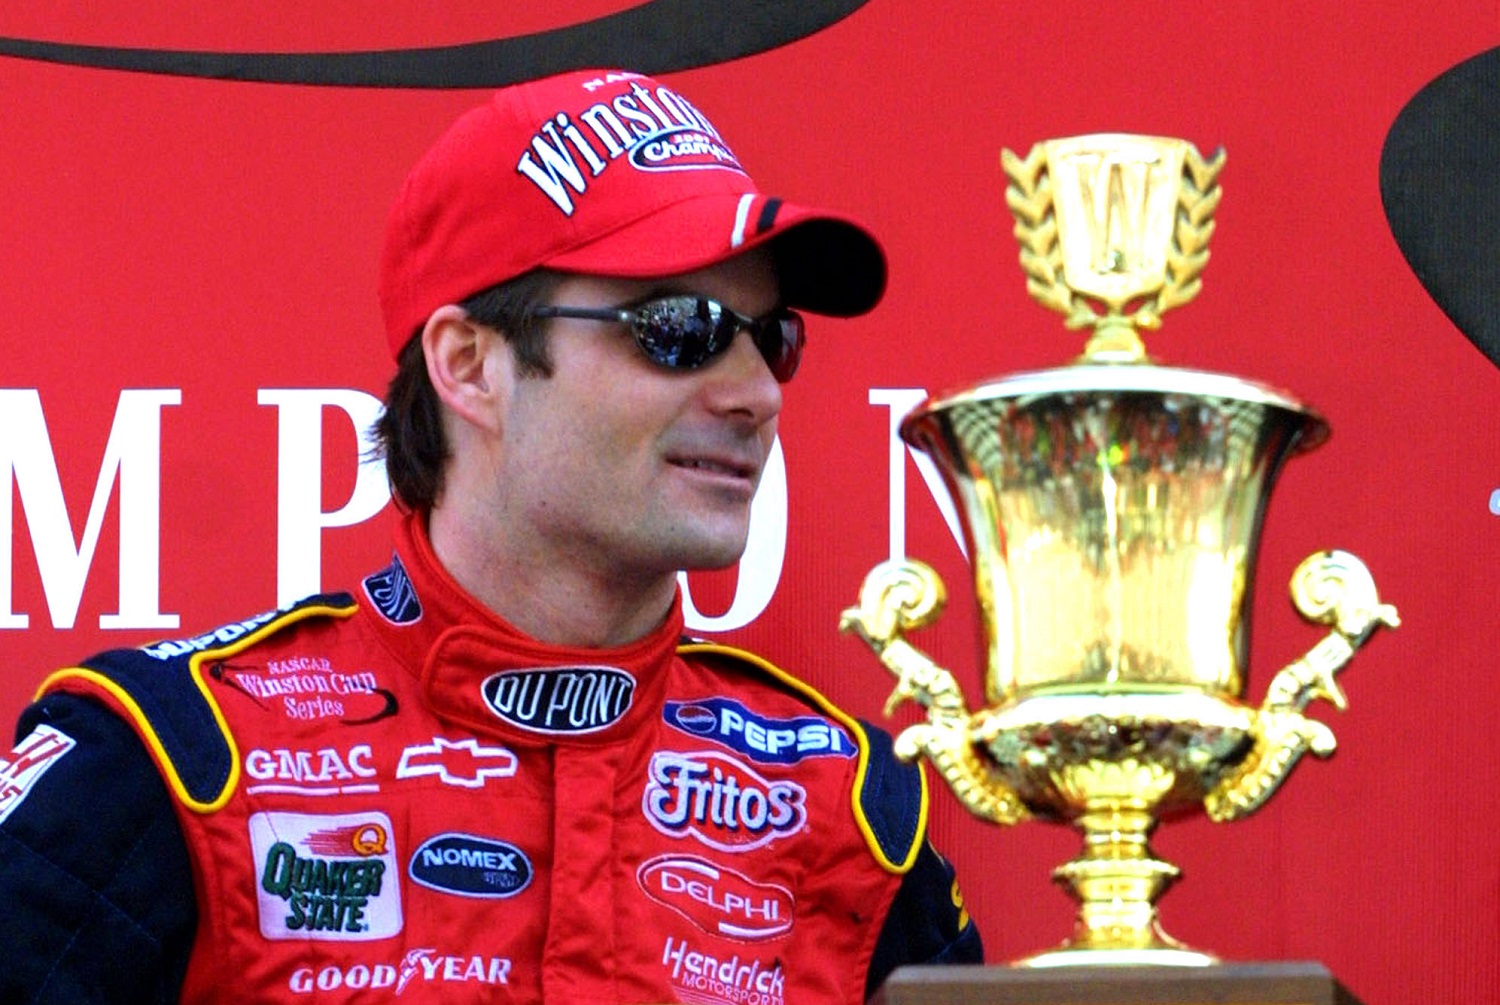 Jeff Gordon at the presentation of his 2001 NASCAR Cup Series championship trophy.